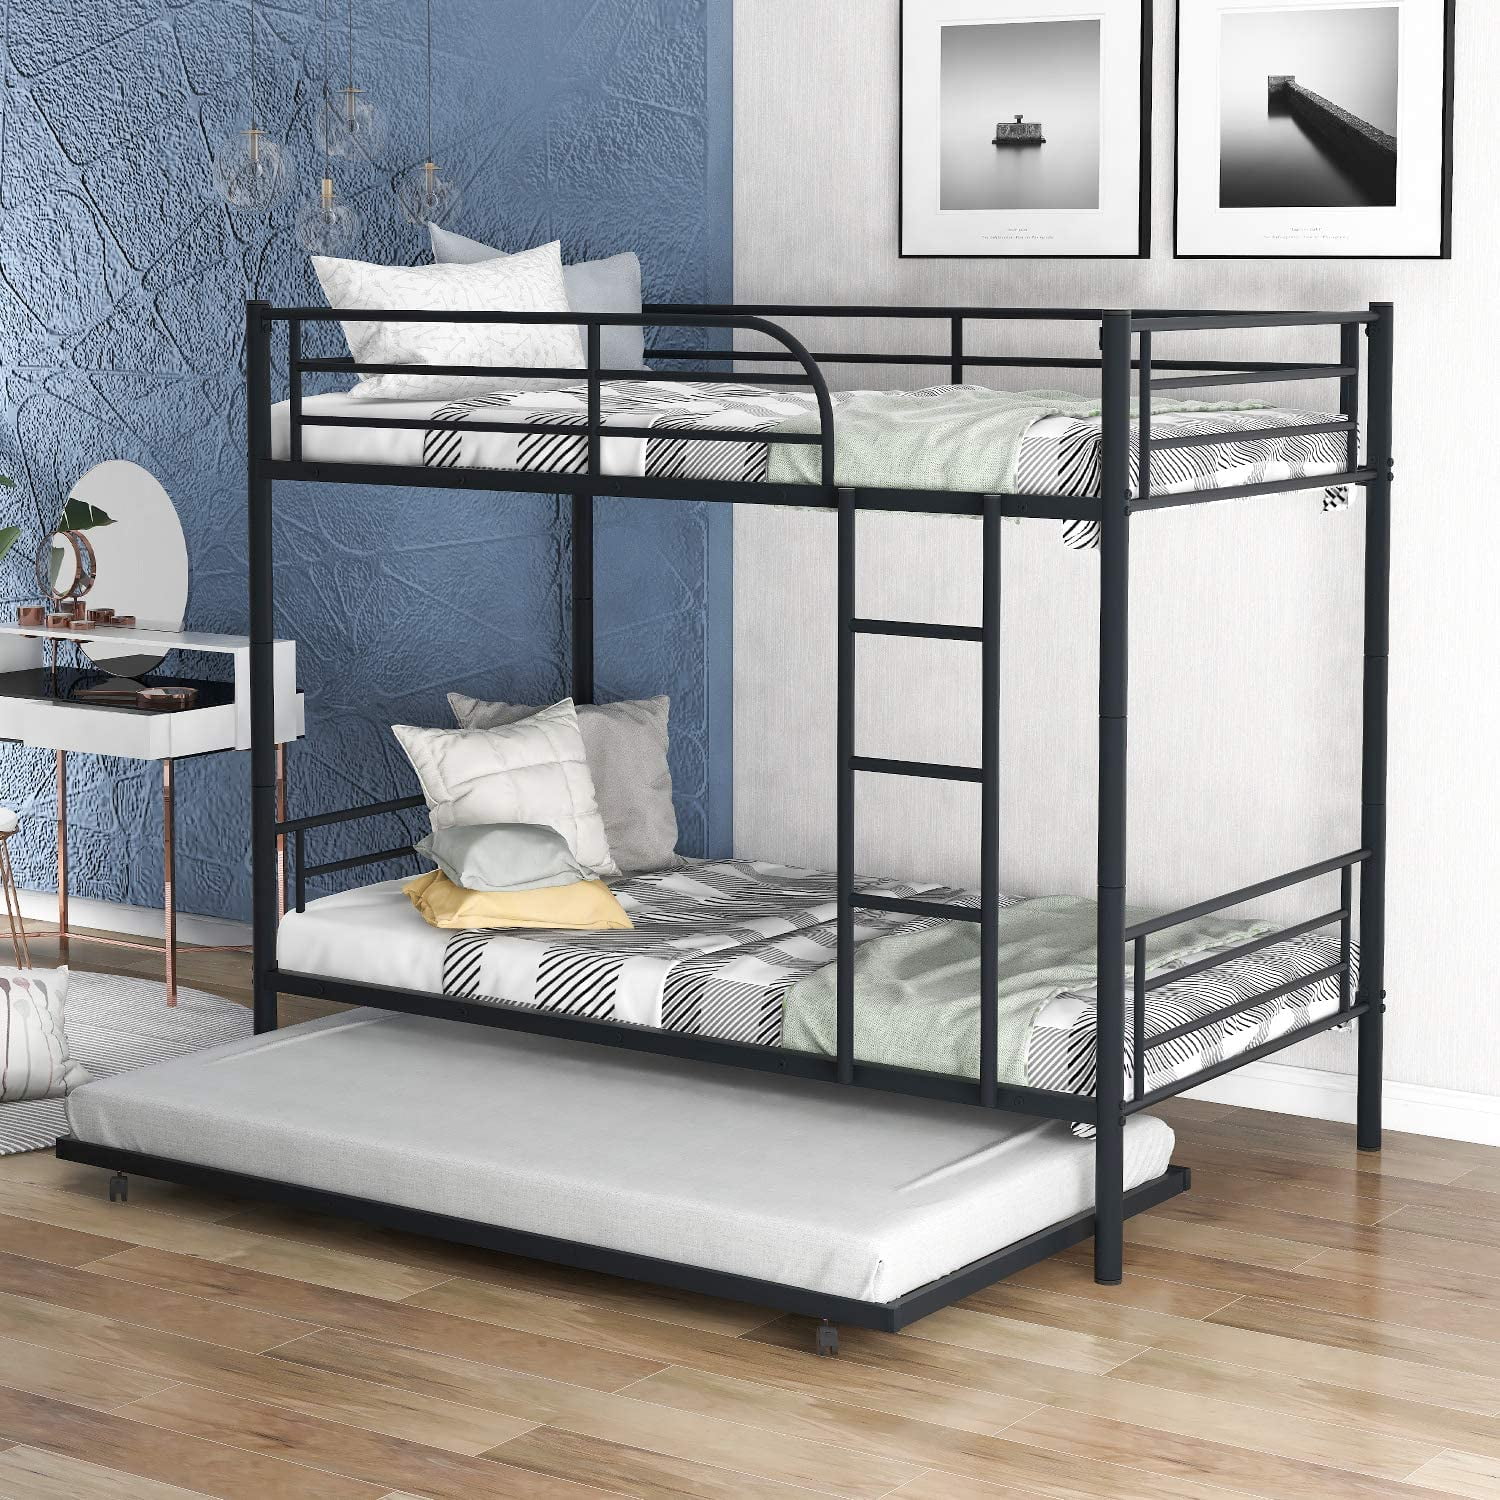 Churanty Twin Over Metal Bunk Bed, Trundle Bunk Beds With Mattresses